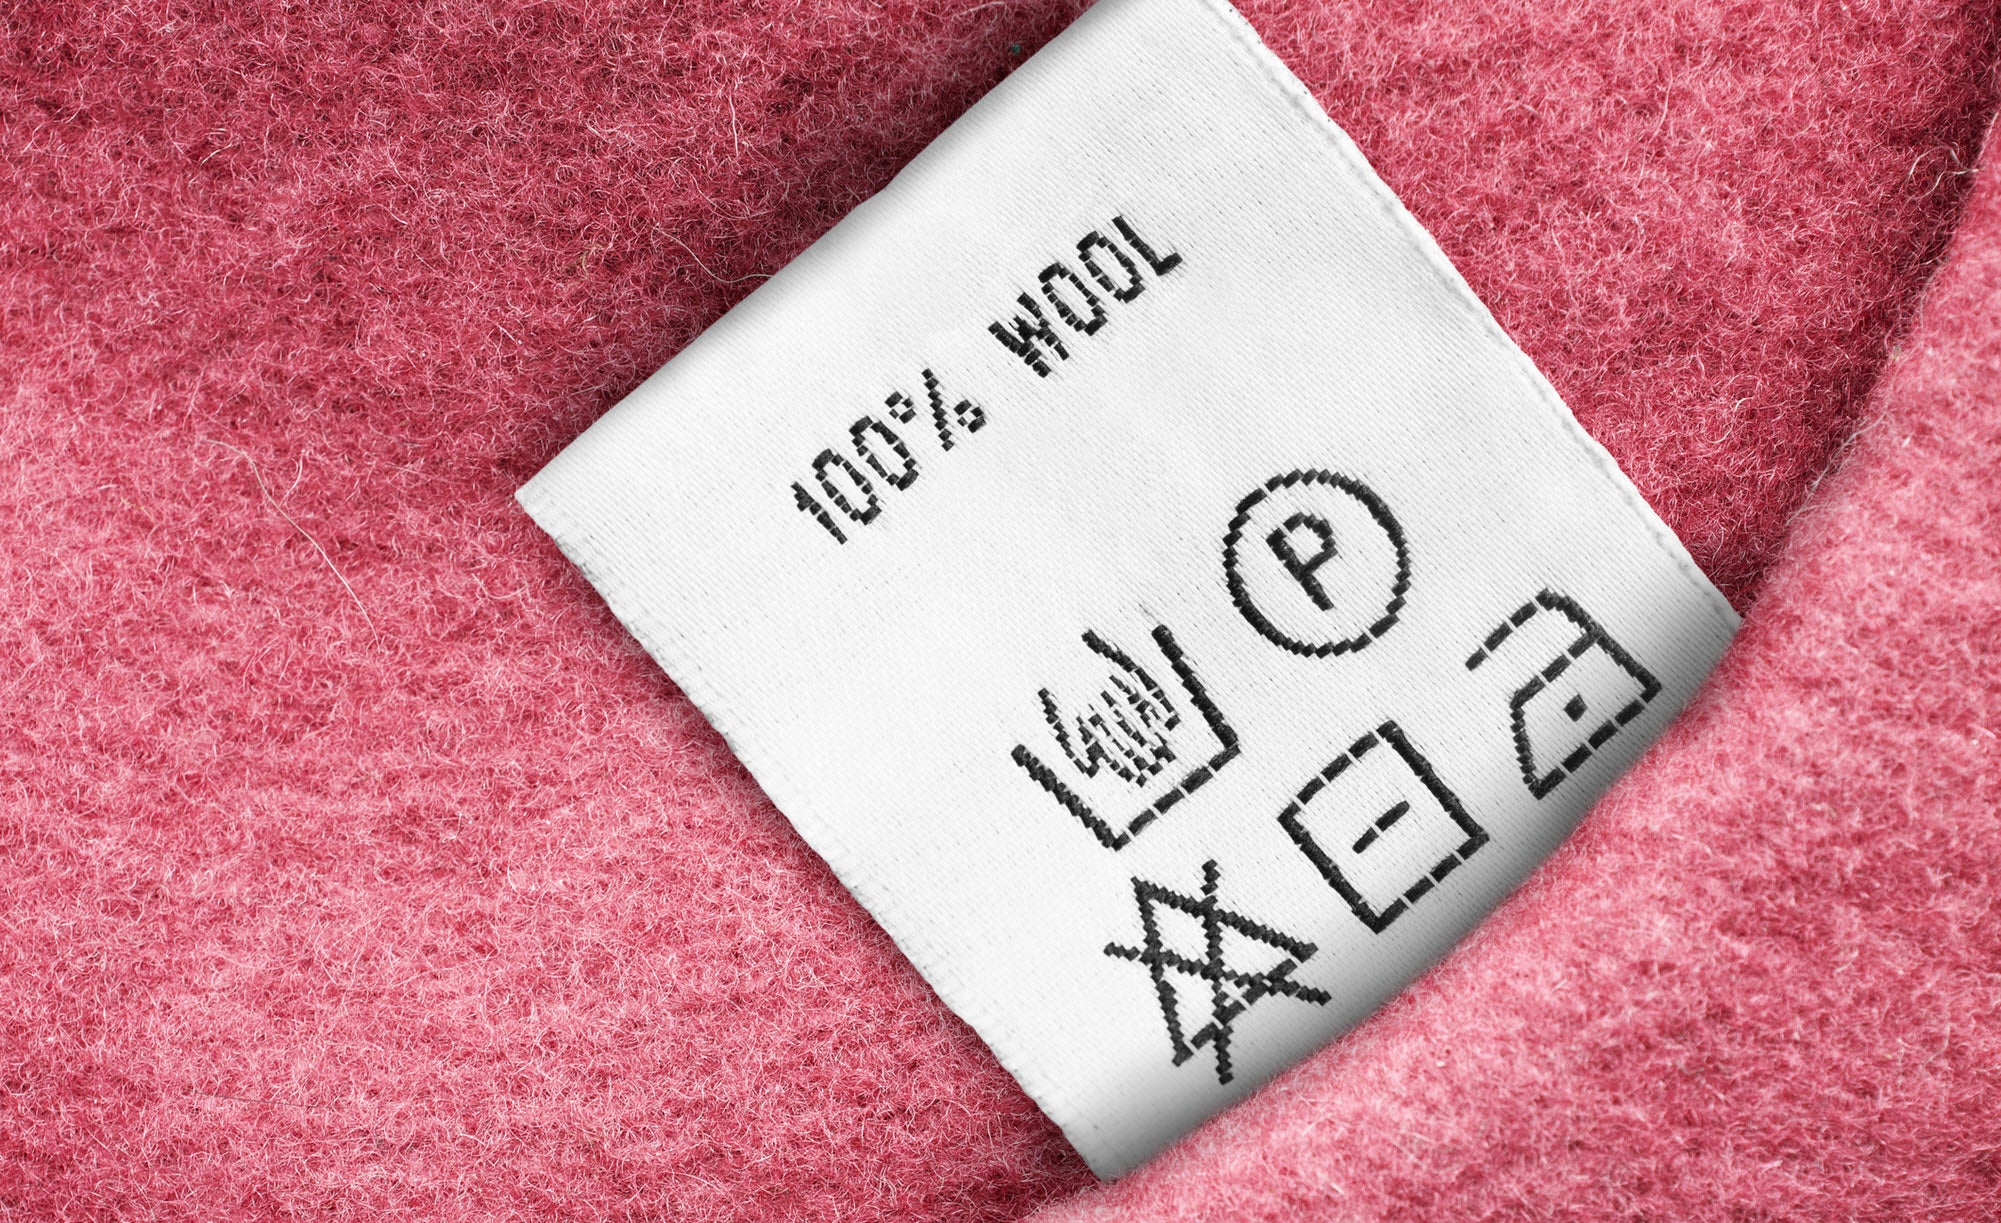 Reading a care label for a wool garment